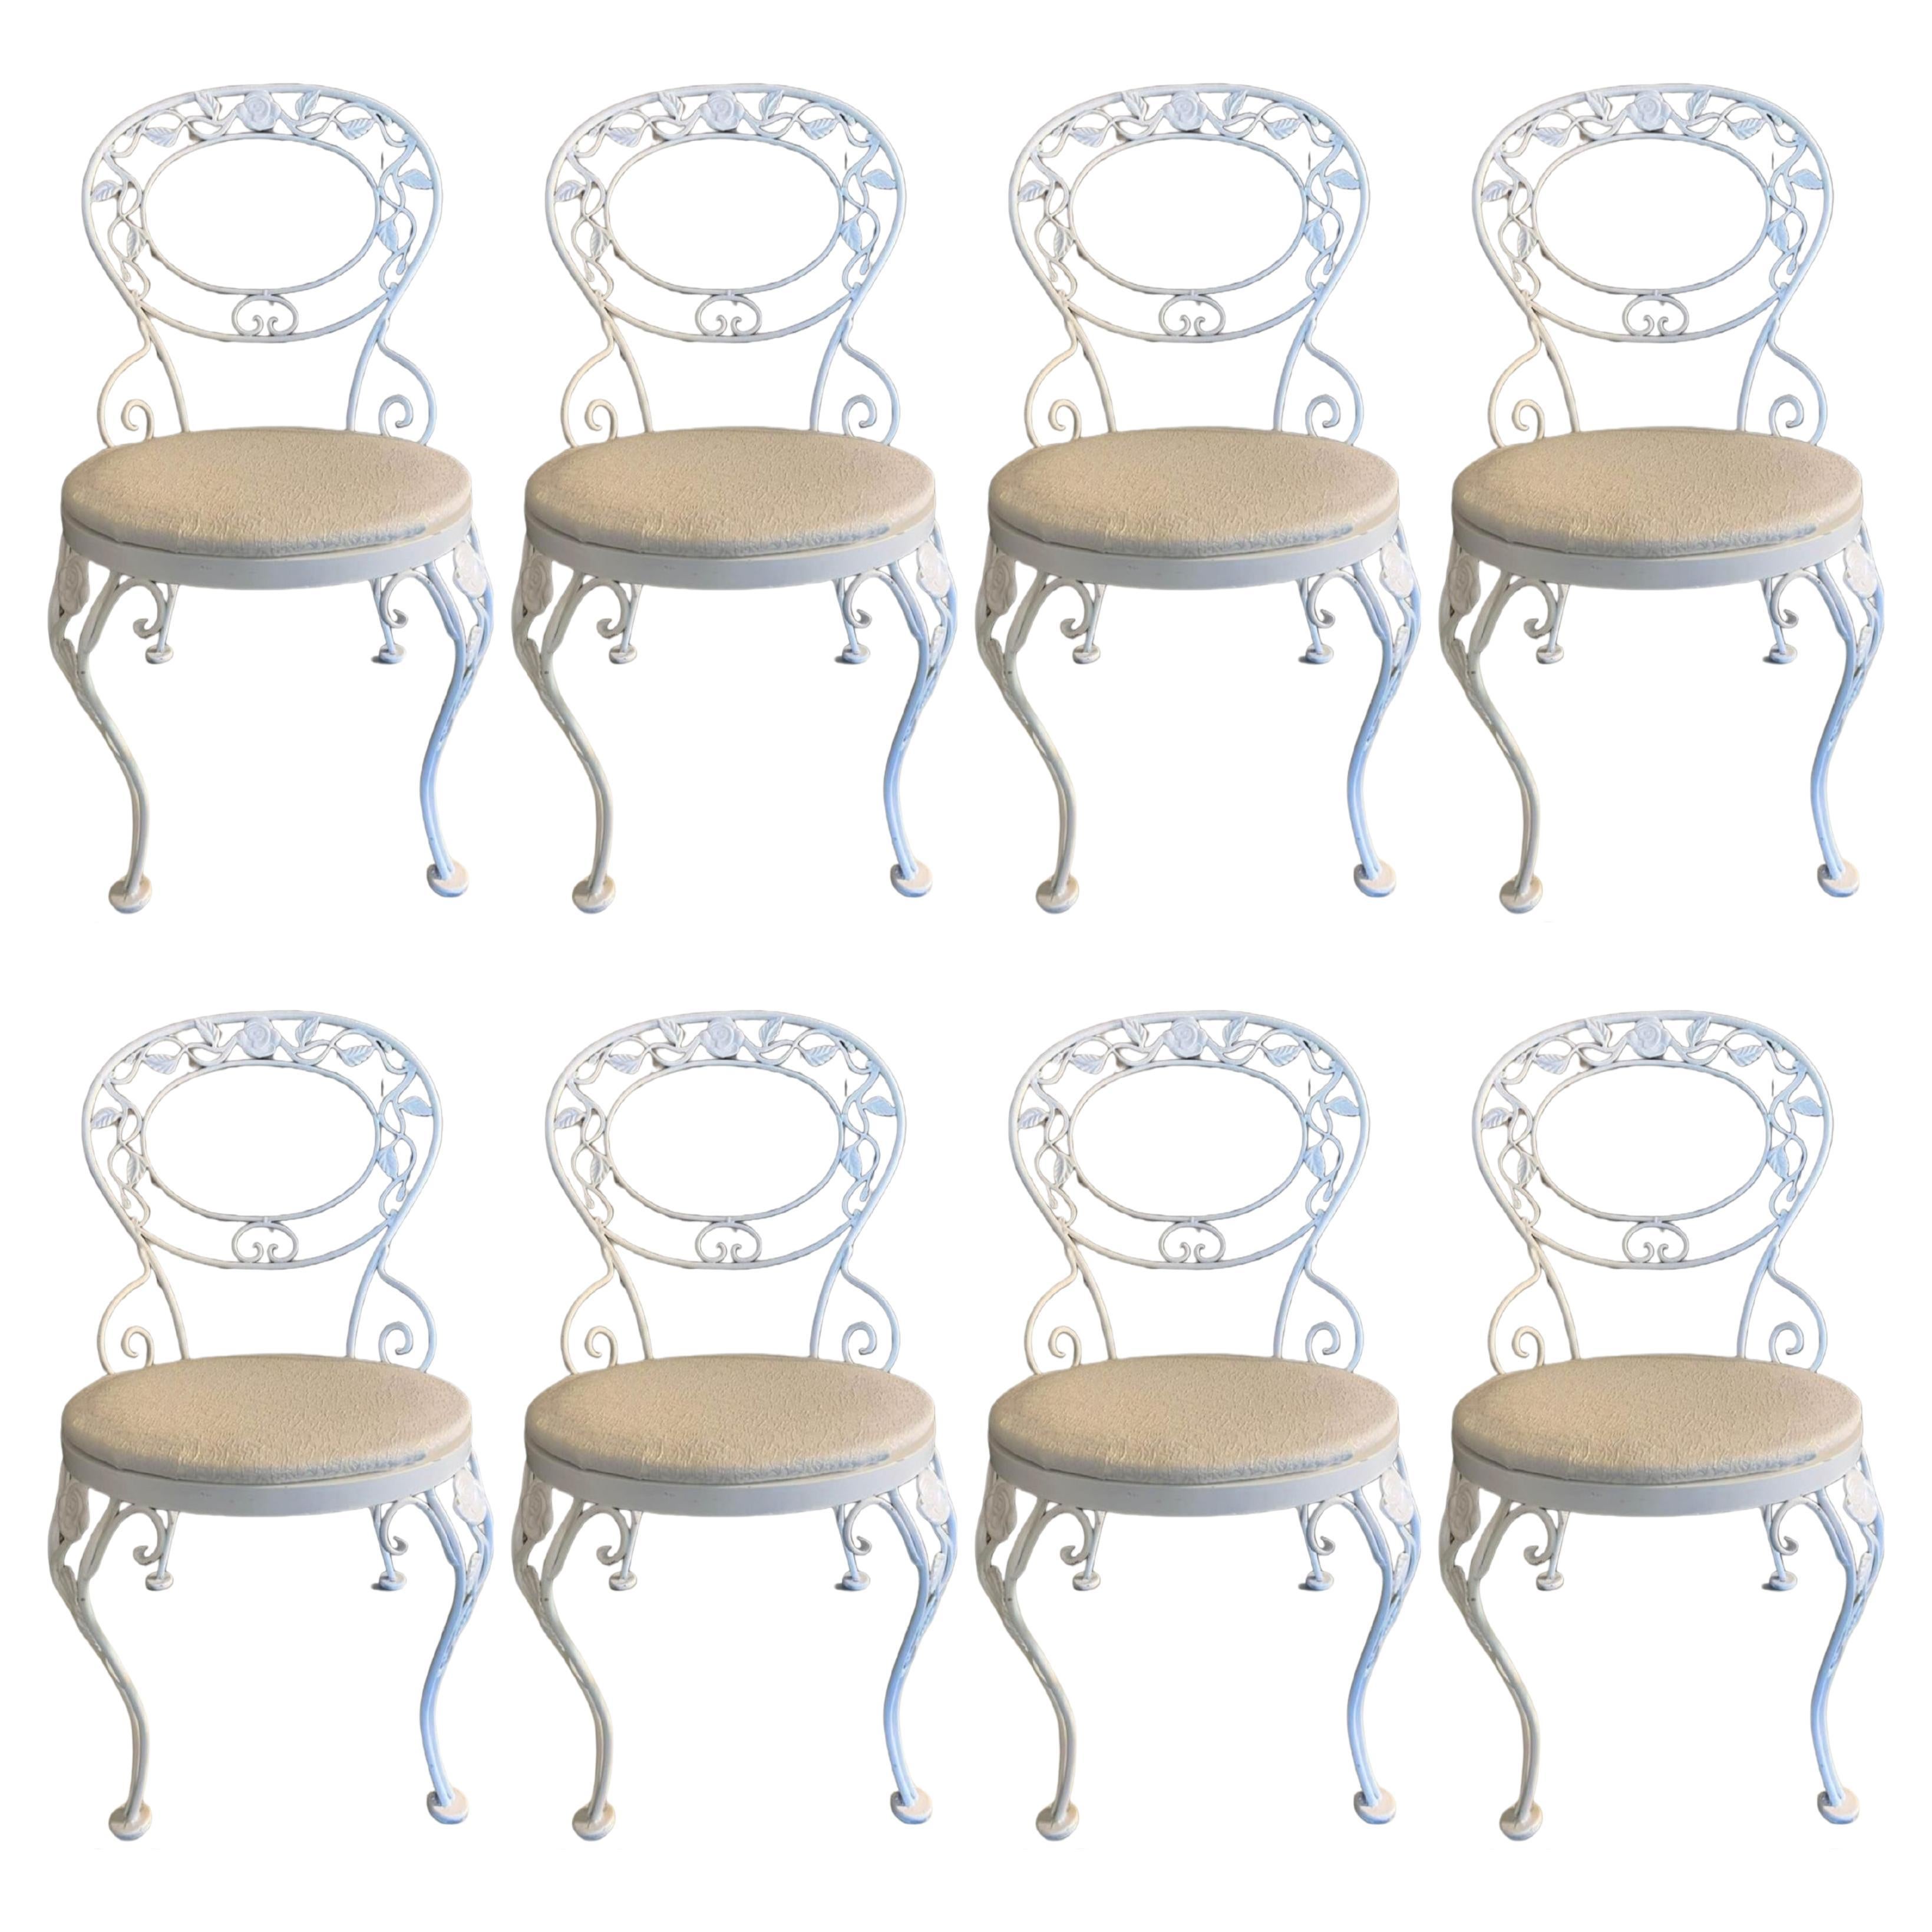 Woodard Wrought Iron Outdoor Patio Seating Set of 8 Chairs (ensemble de 8 chaises)